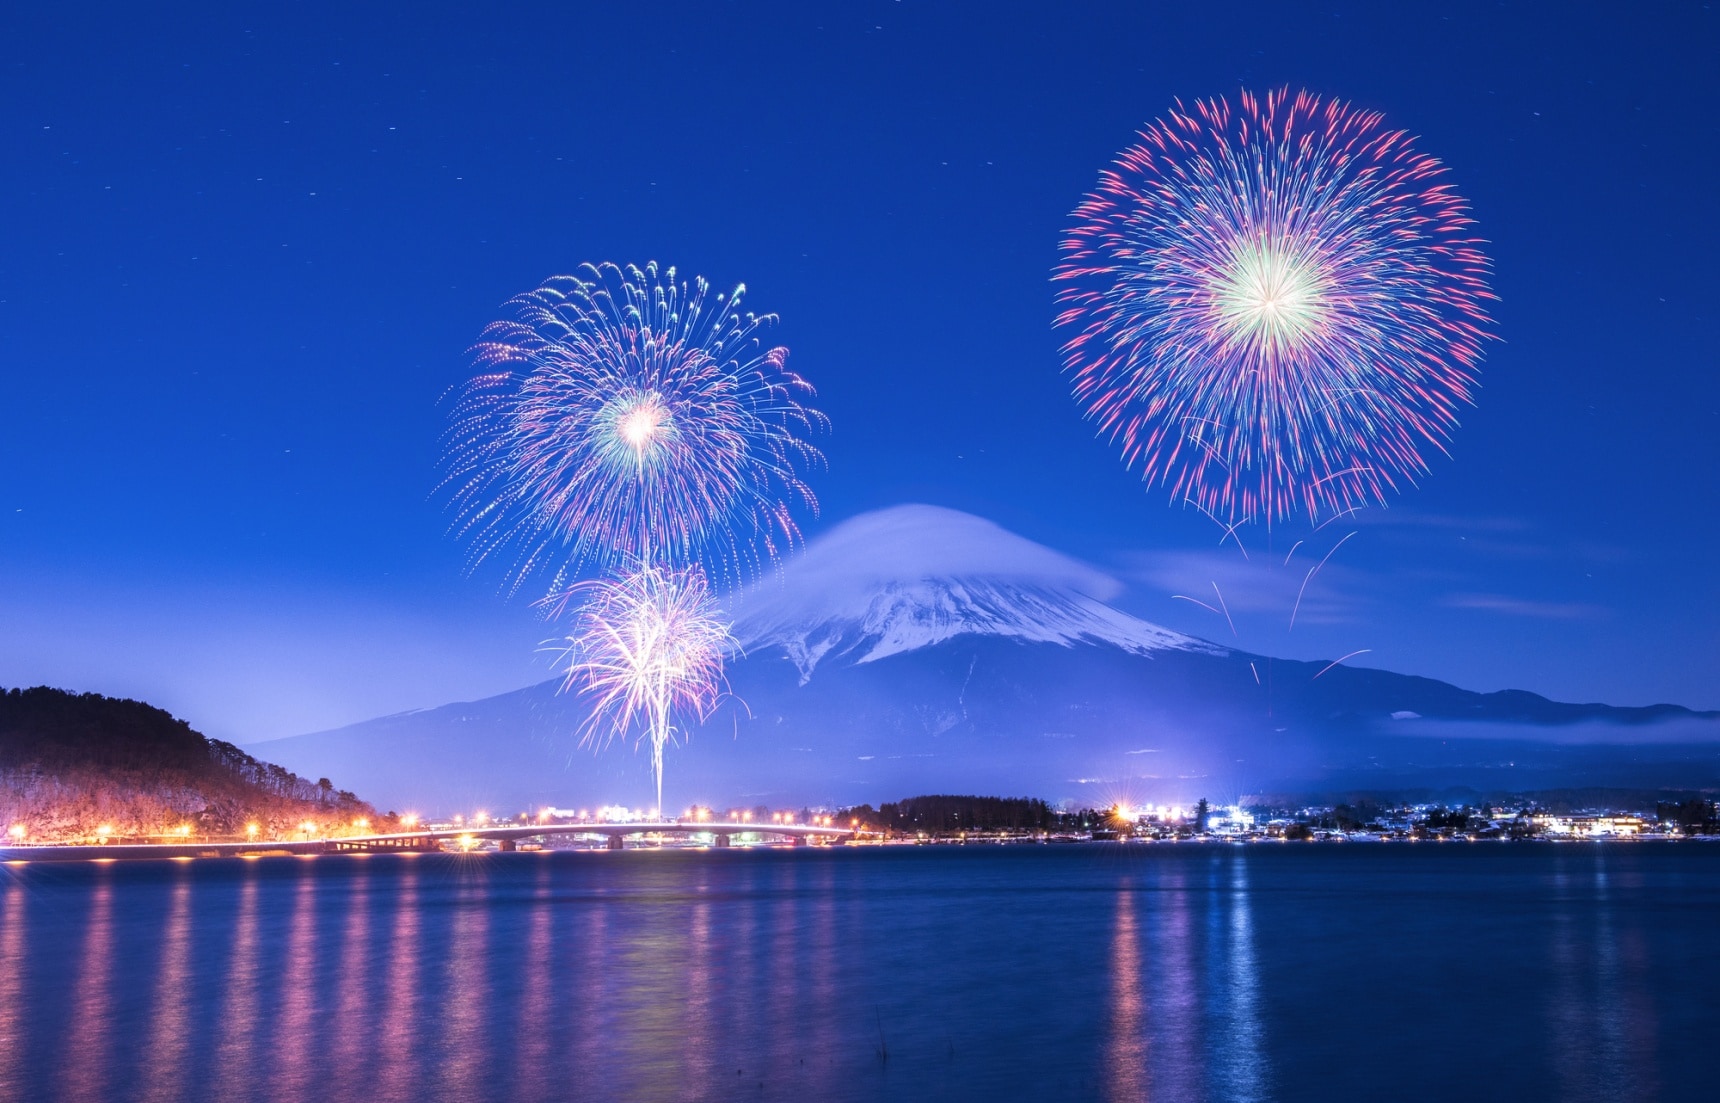 Secret Fireworks Shows Encourage Staying Home All About Japan